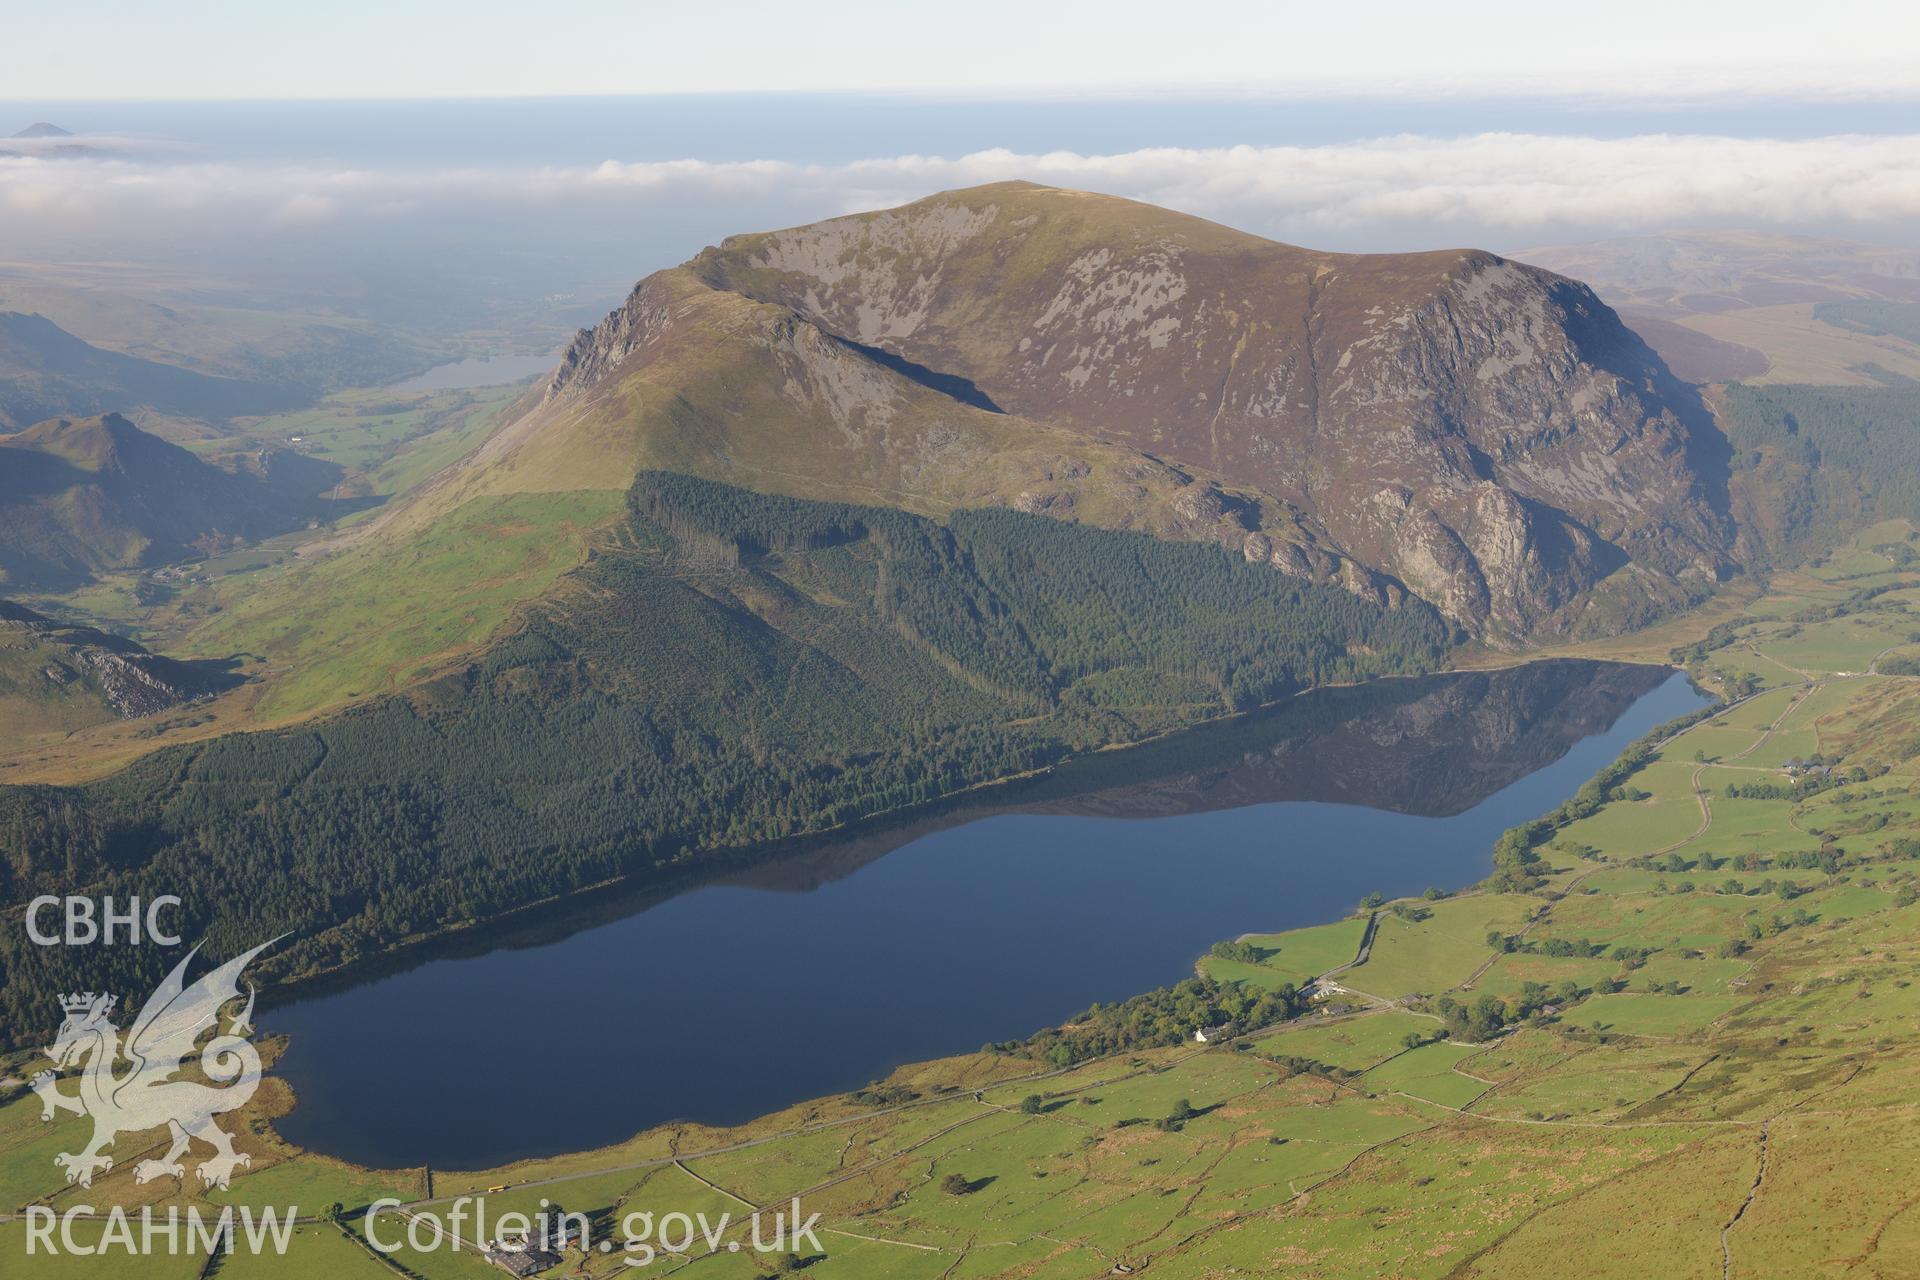 Llyn Cwellyn on the north western side of Snowdon. Oblique aerial photograph taken during the Royal Commission's programme of archaeological aerial reconnaissance by Toby Driver on 2nd October 2015.